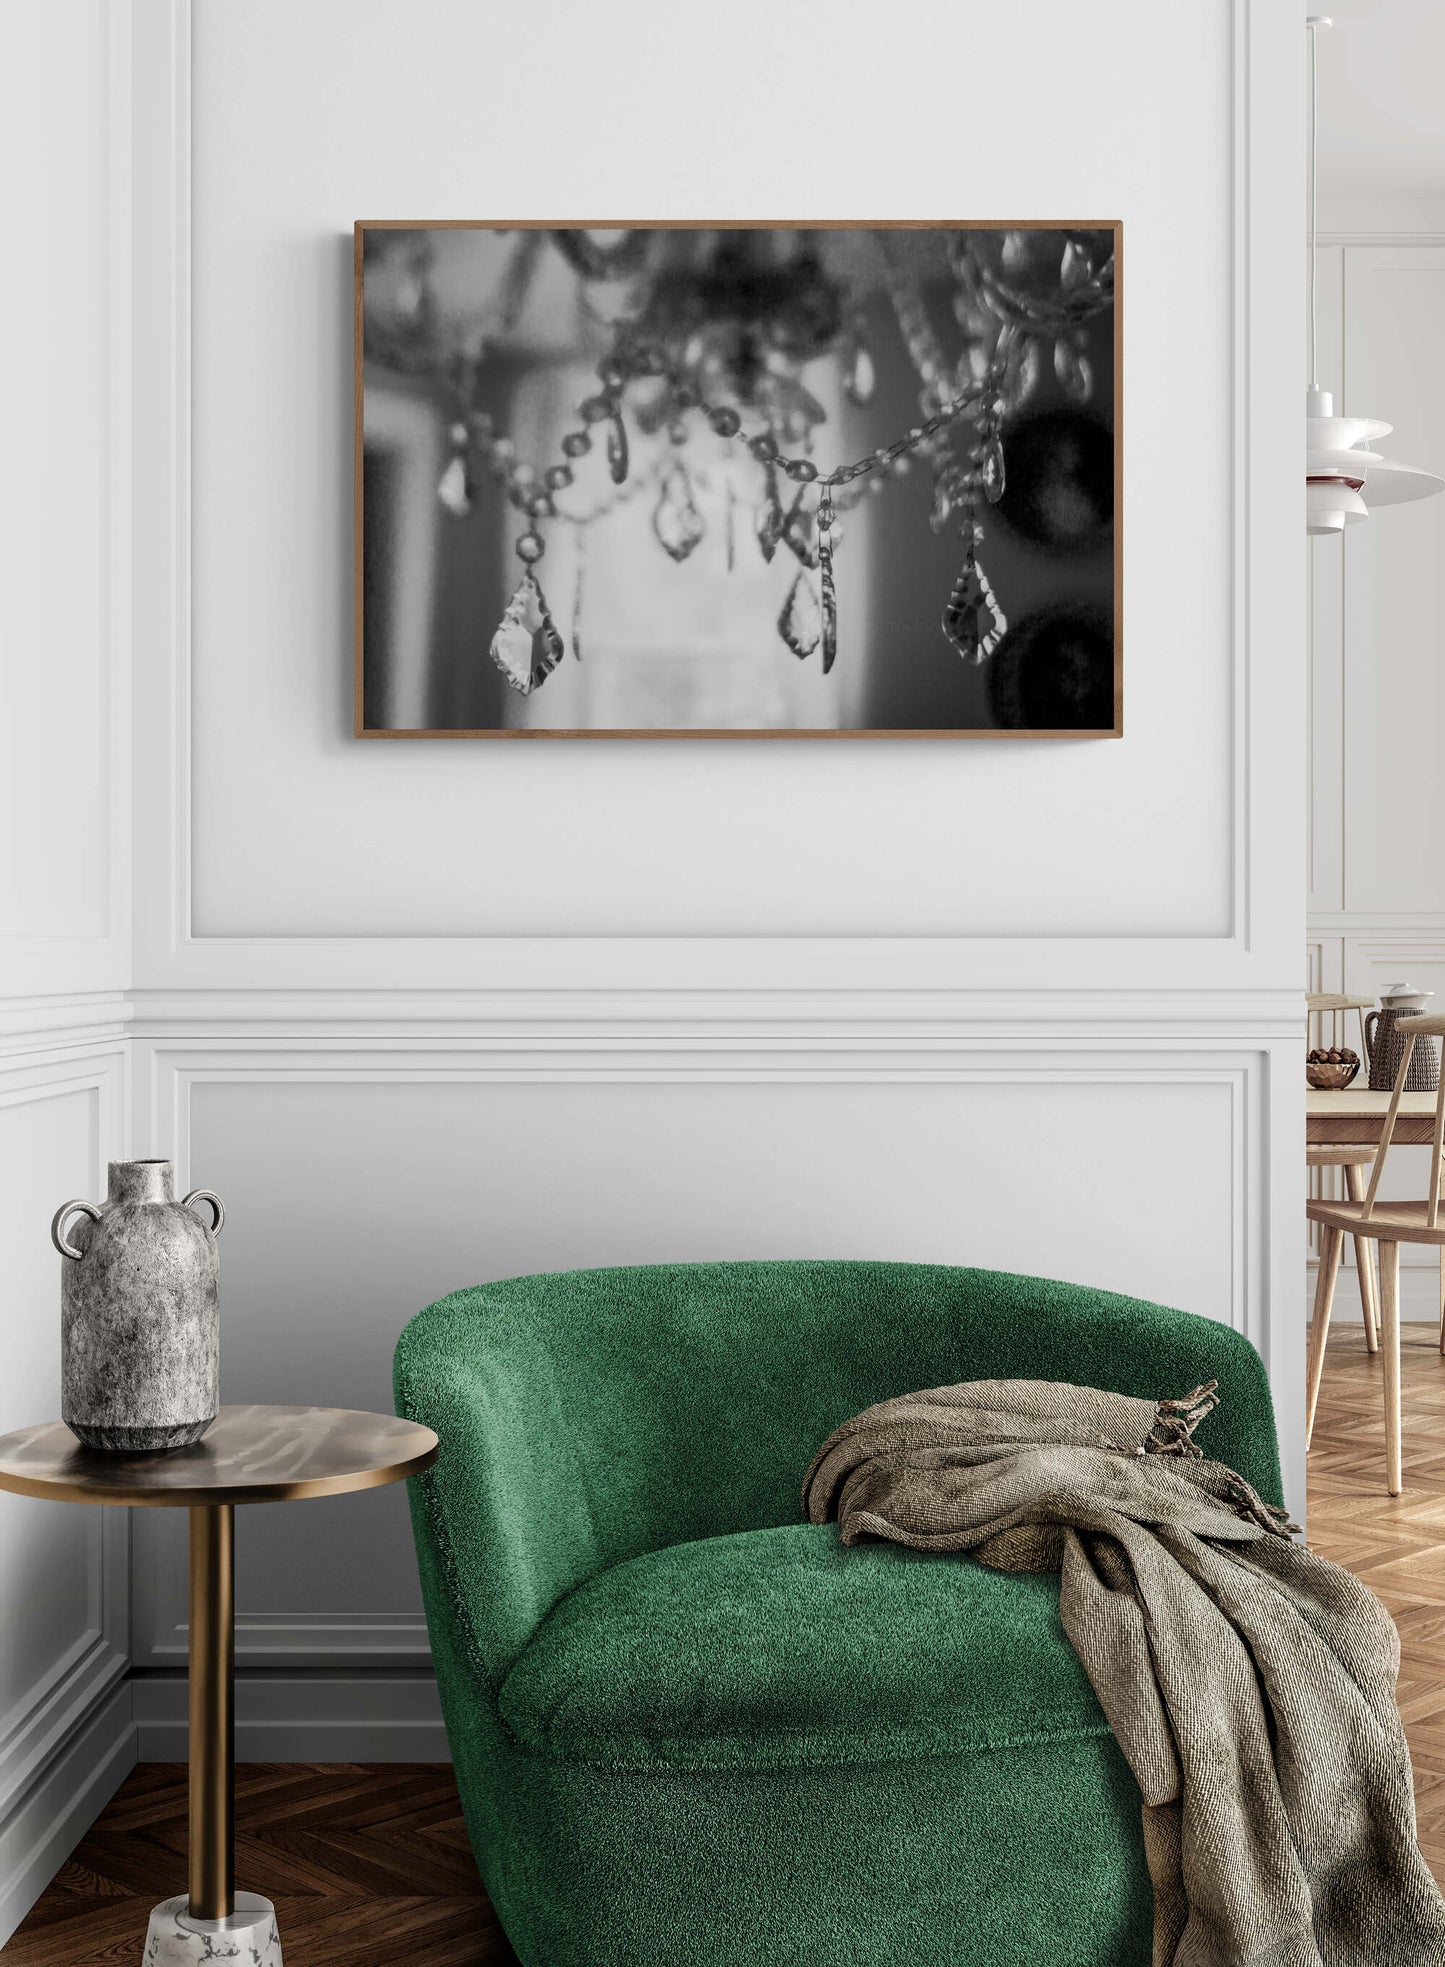 Black and White Photograph Wall Art Print of a Chandelier in a living room